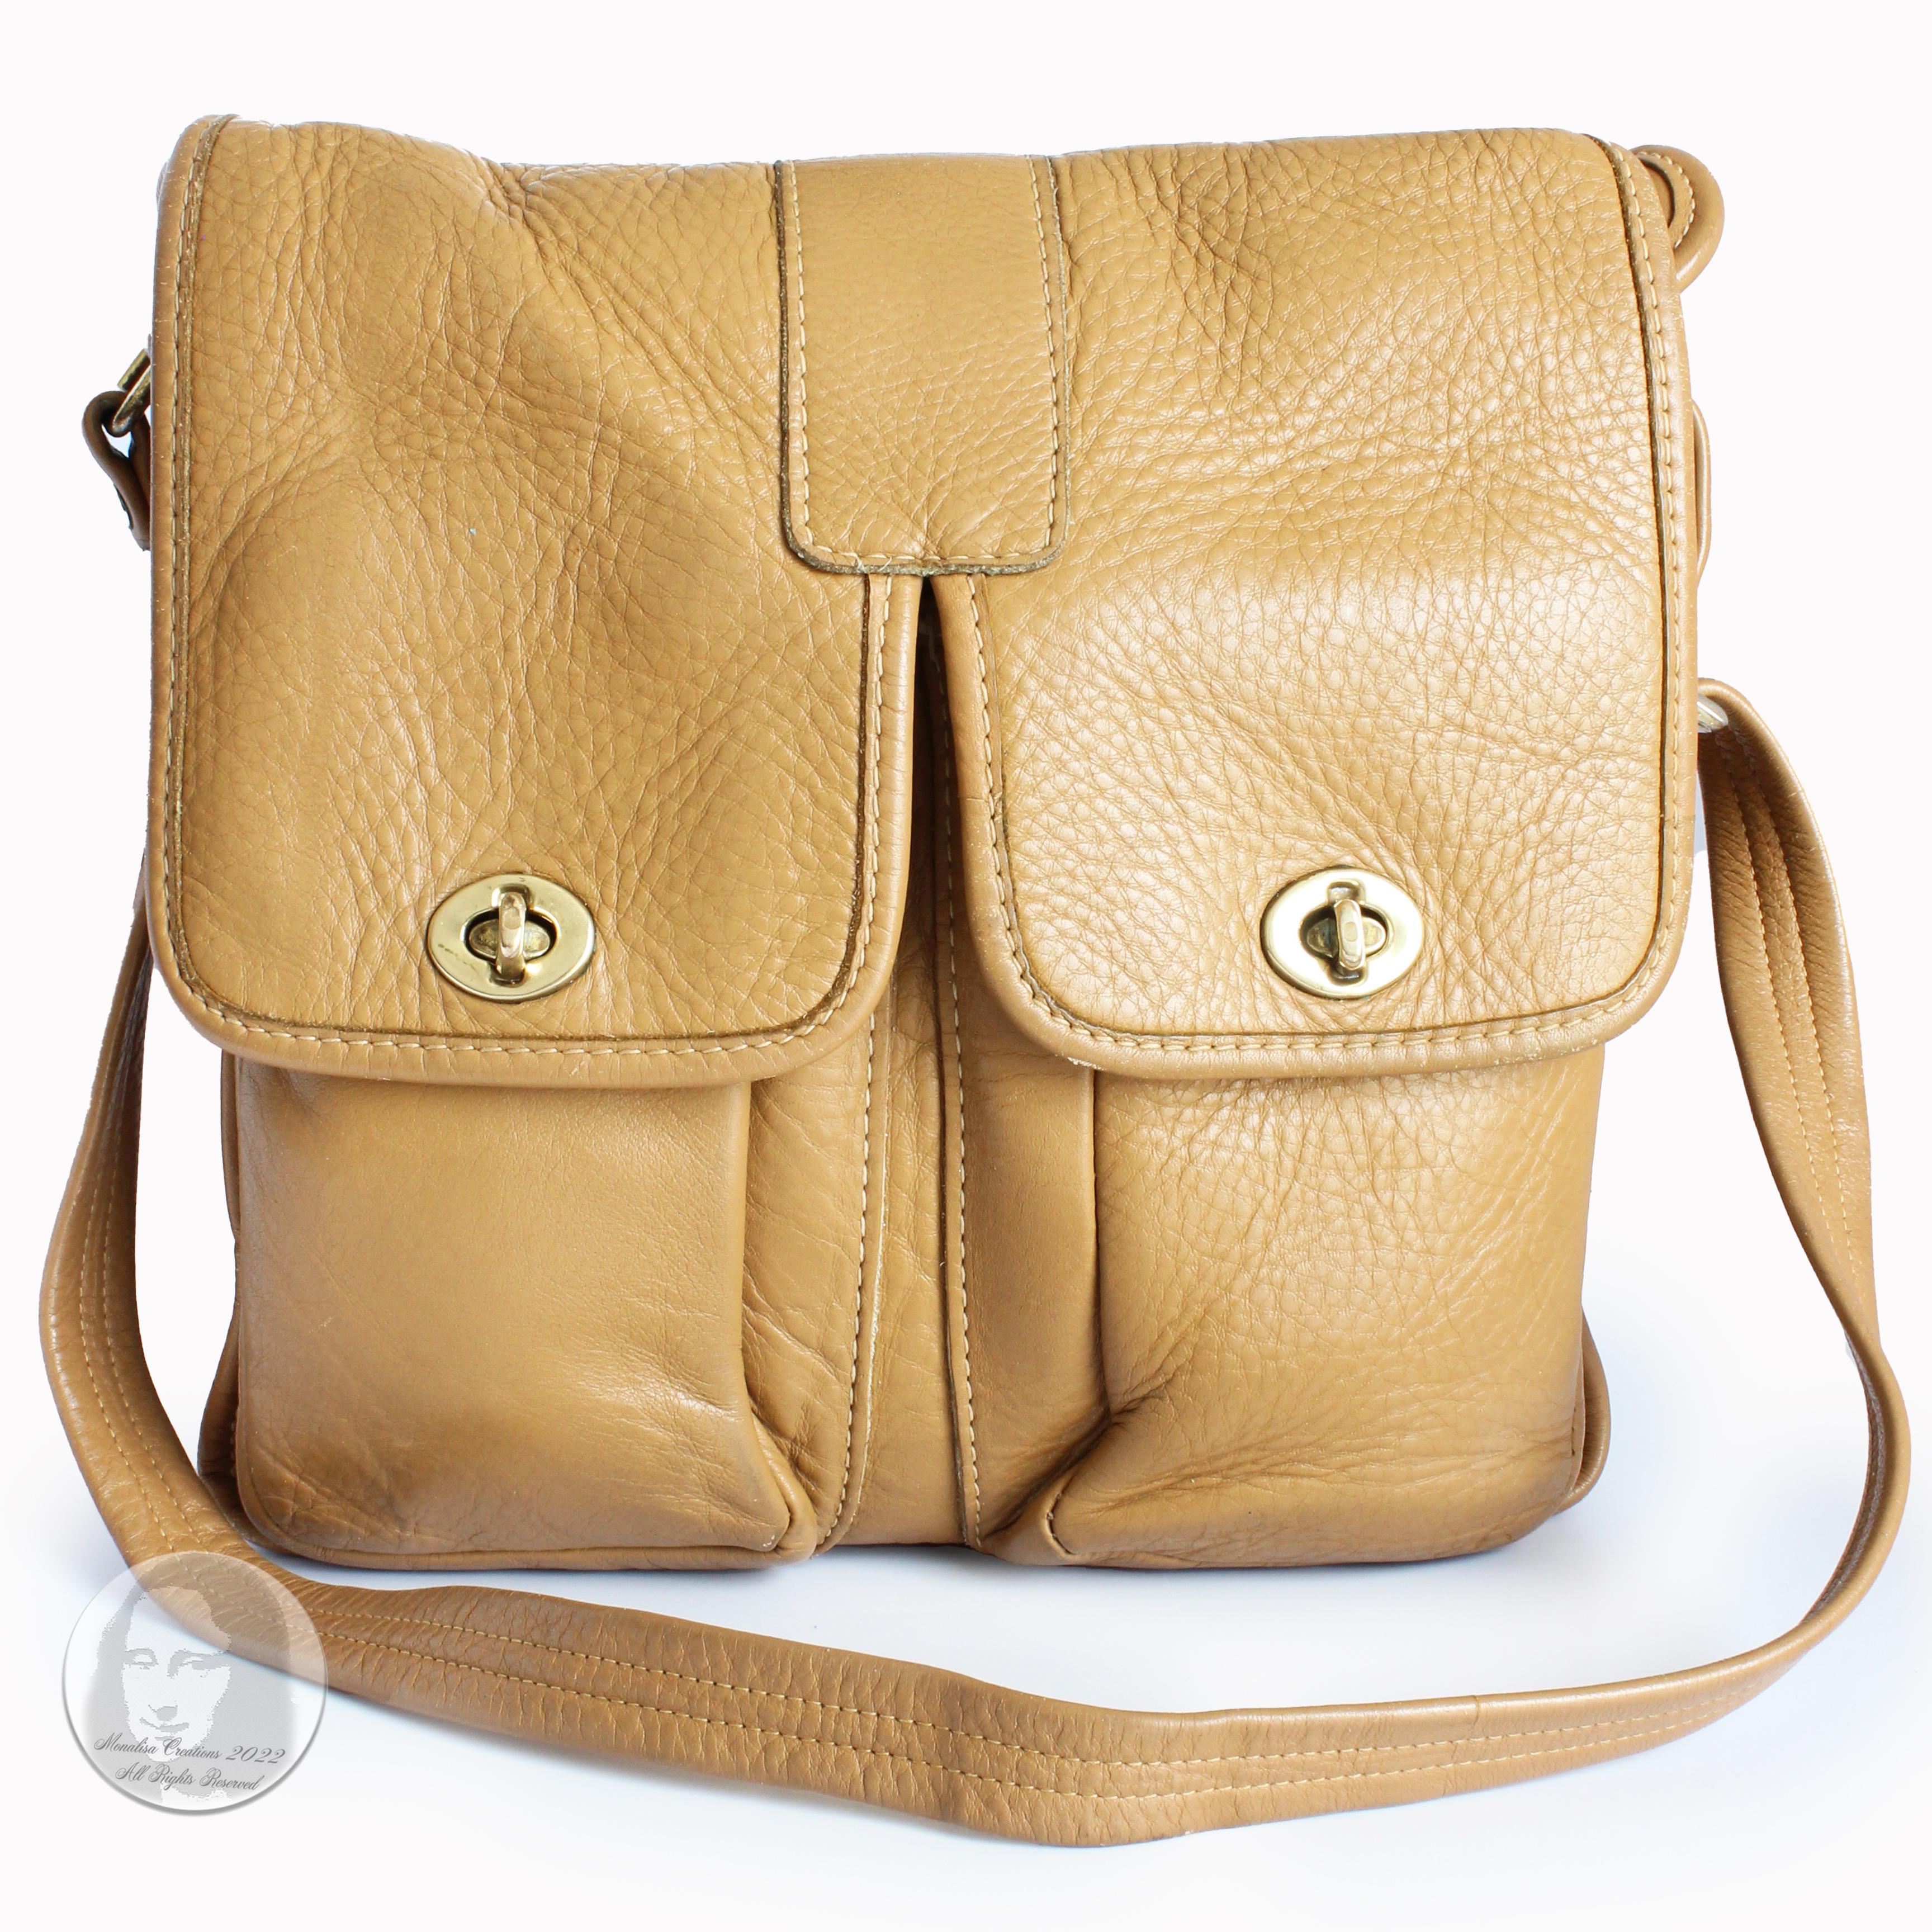 Preowned, vintage Bonnie Cashin for Meyers leather messenger bag, likely made in the mid 70s.  Made from caramel tan leather, it features an adjustable, non-removable strap and two turnlock pouches under the flap.  Interior is unlined with no